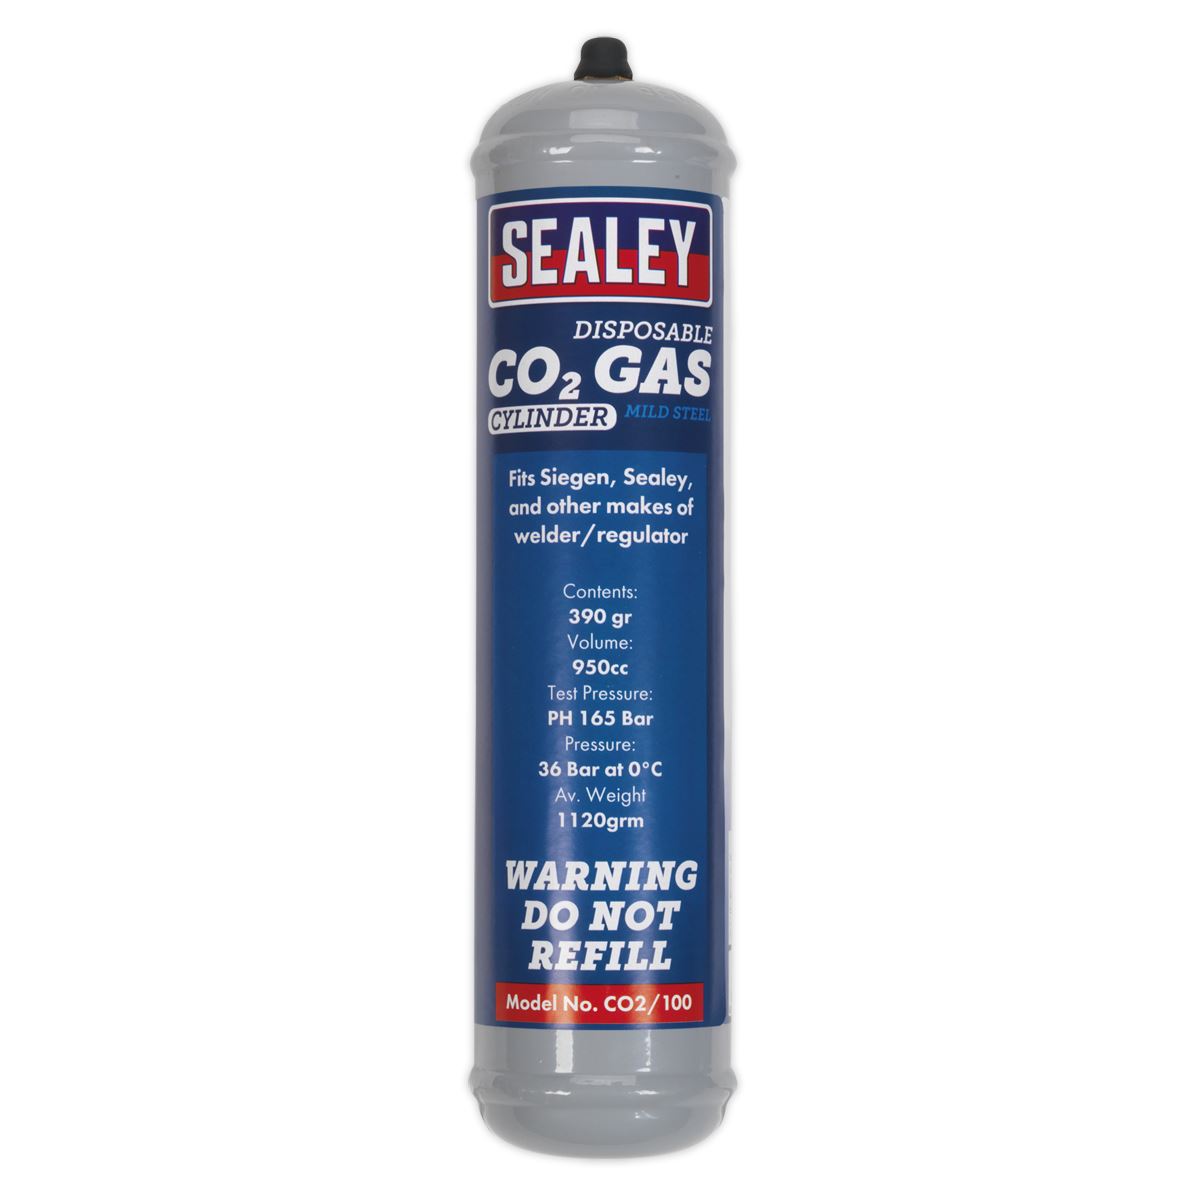 Sealey Gas Cylinder Disposable Carbon Dioxide 390g